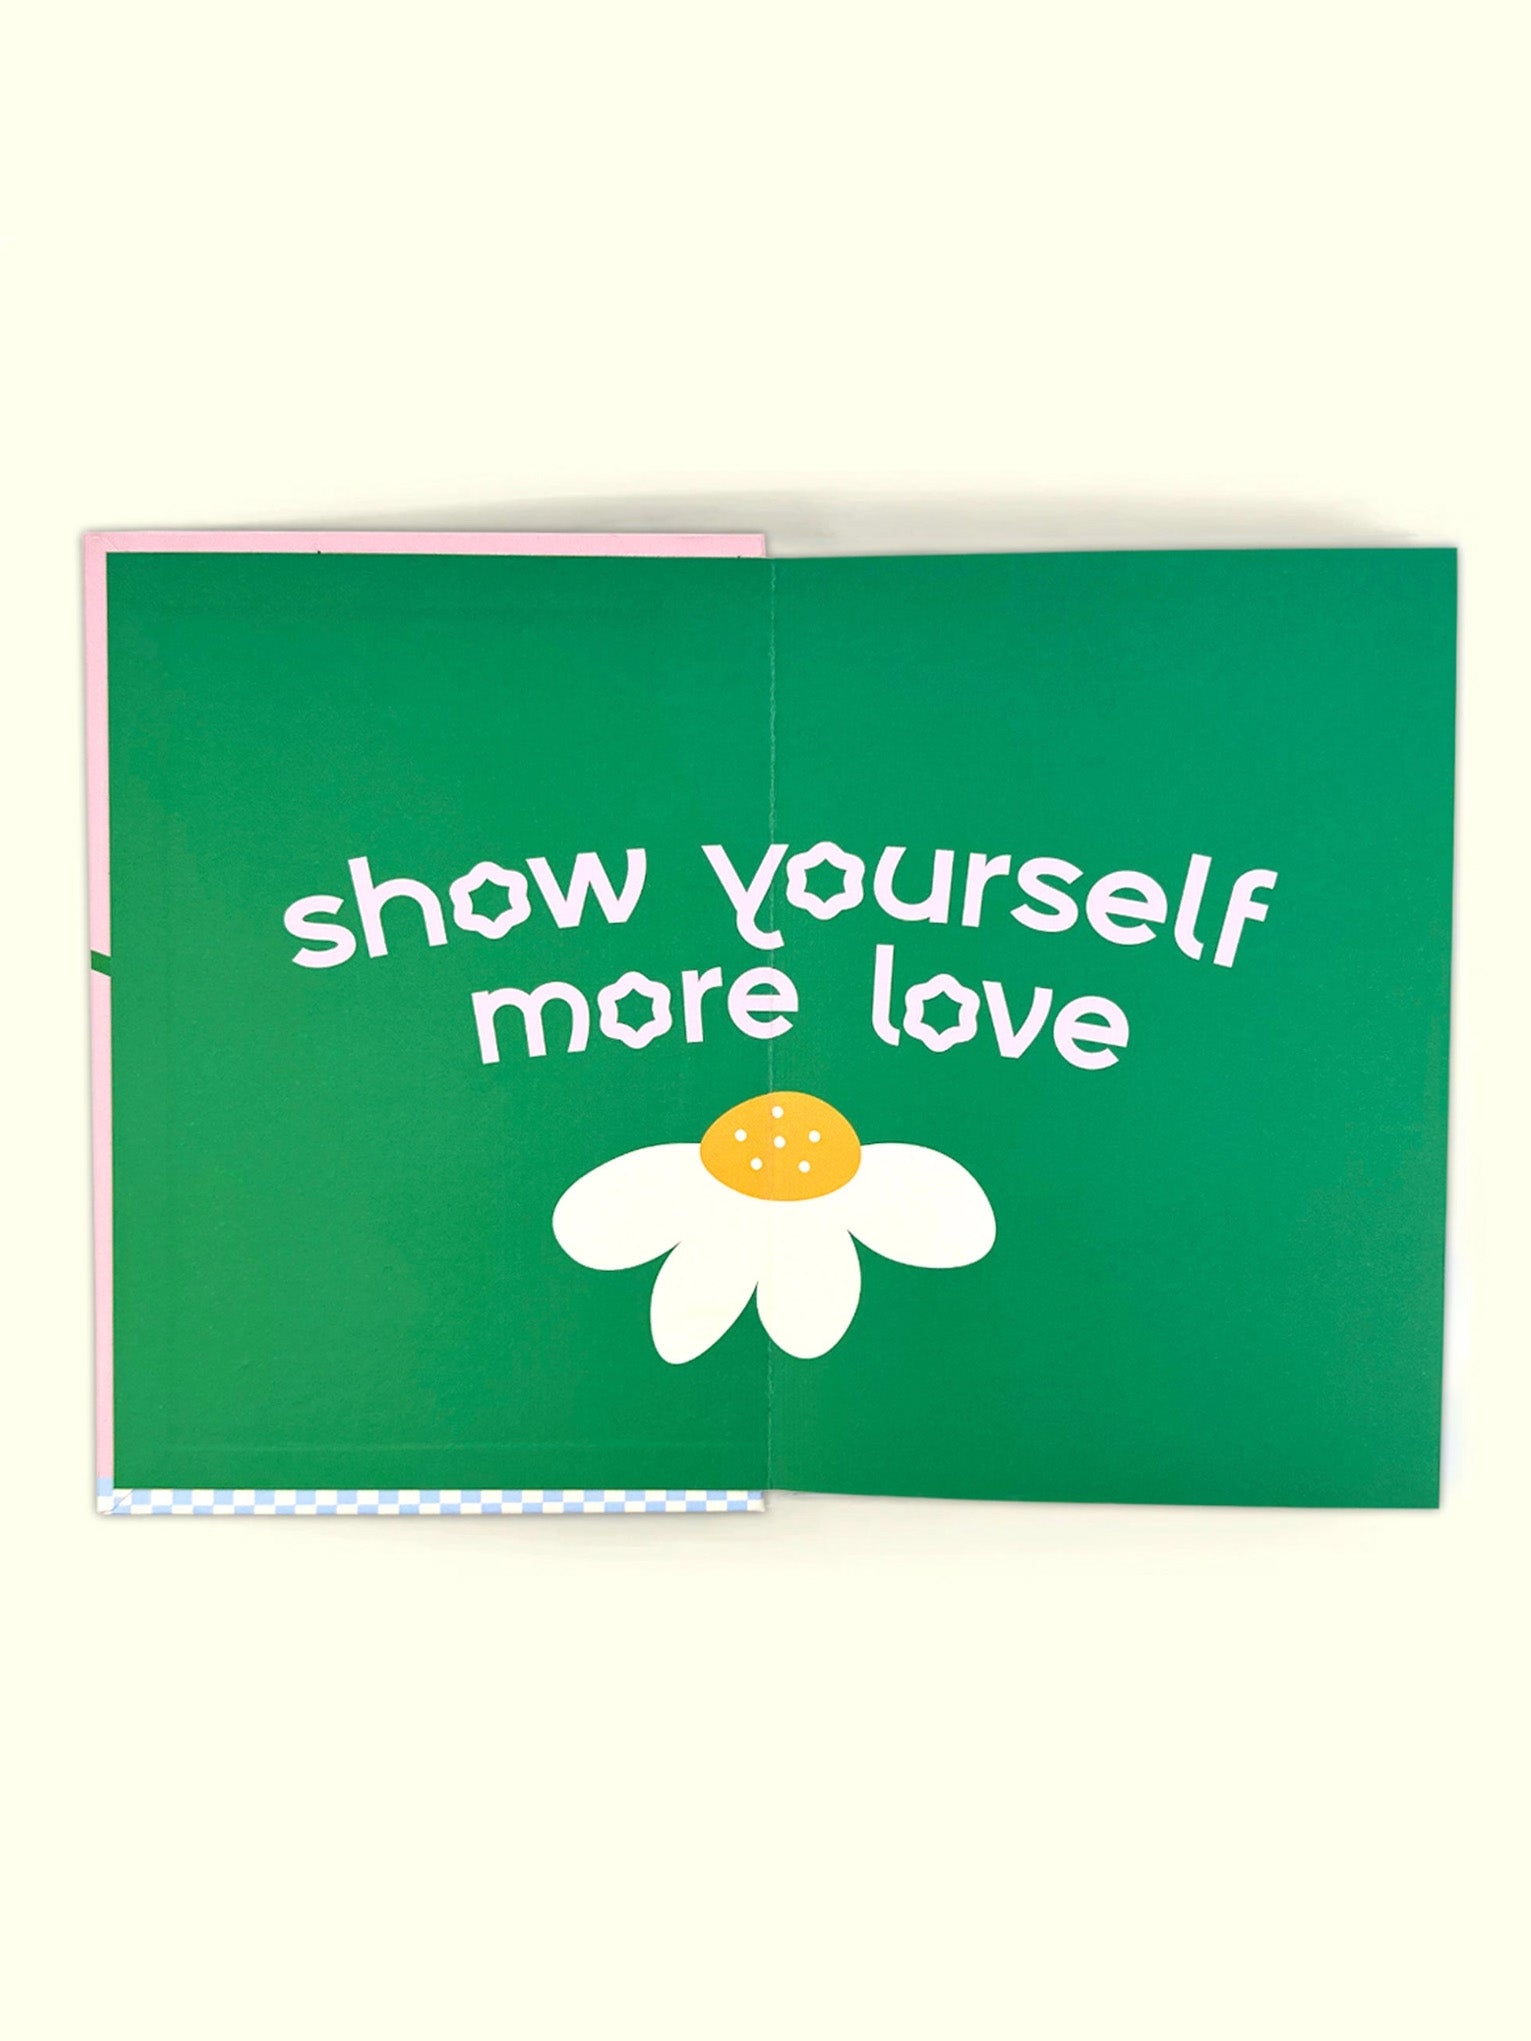 show up for yourself gratitude journal